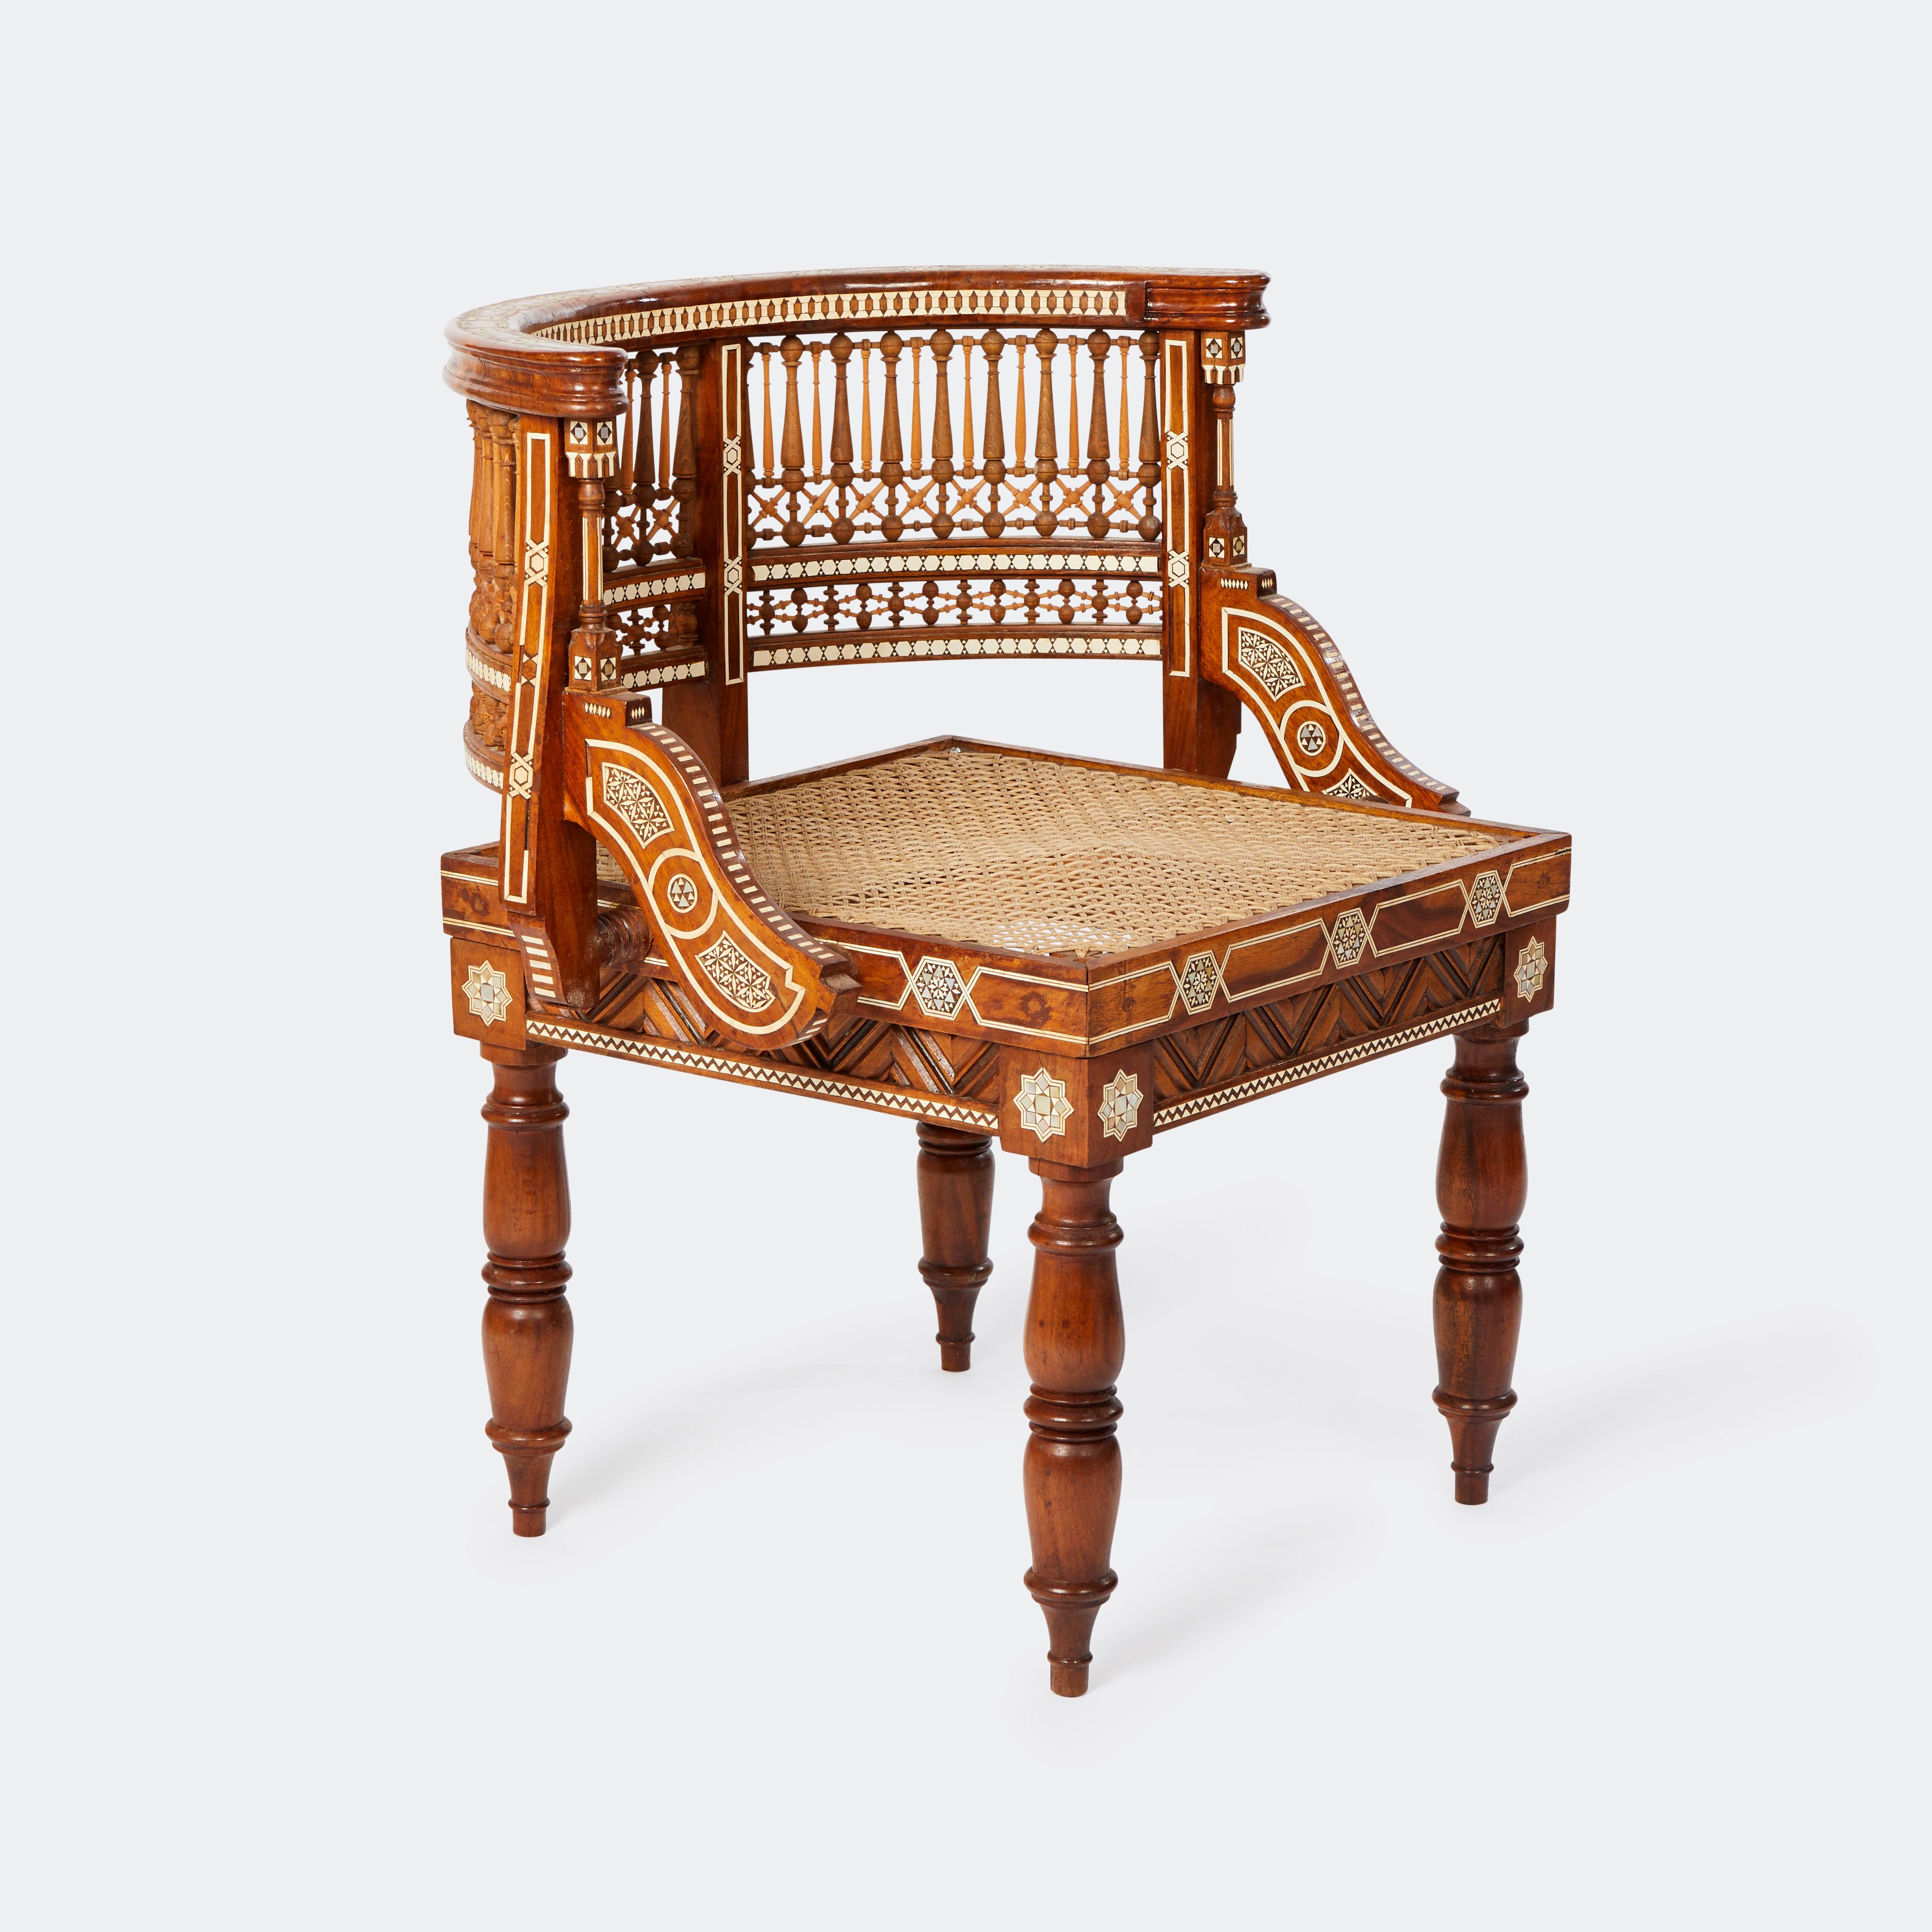 A pair of Moroccan inlaid chairs with turned legs and carved open work Mashrabiya backs. Rosewood with faux ivory inlay. Circa 1900. 